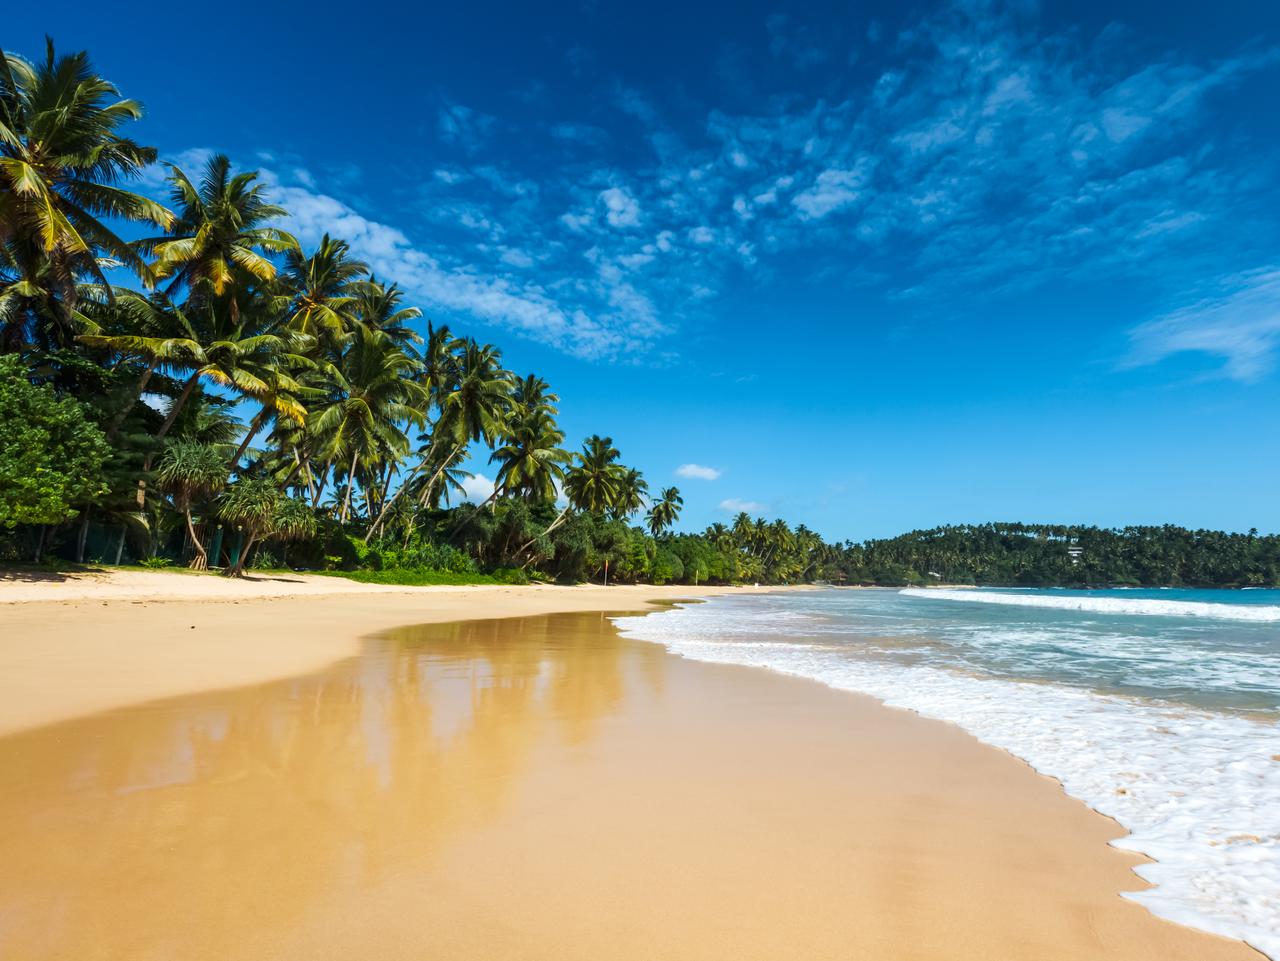 Top things to do in Sri Lanka, according to Travel Guides escape